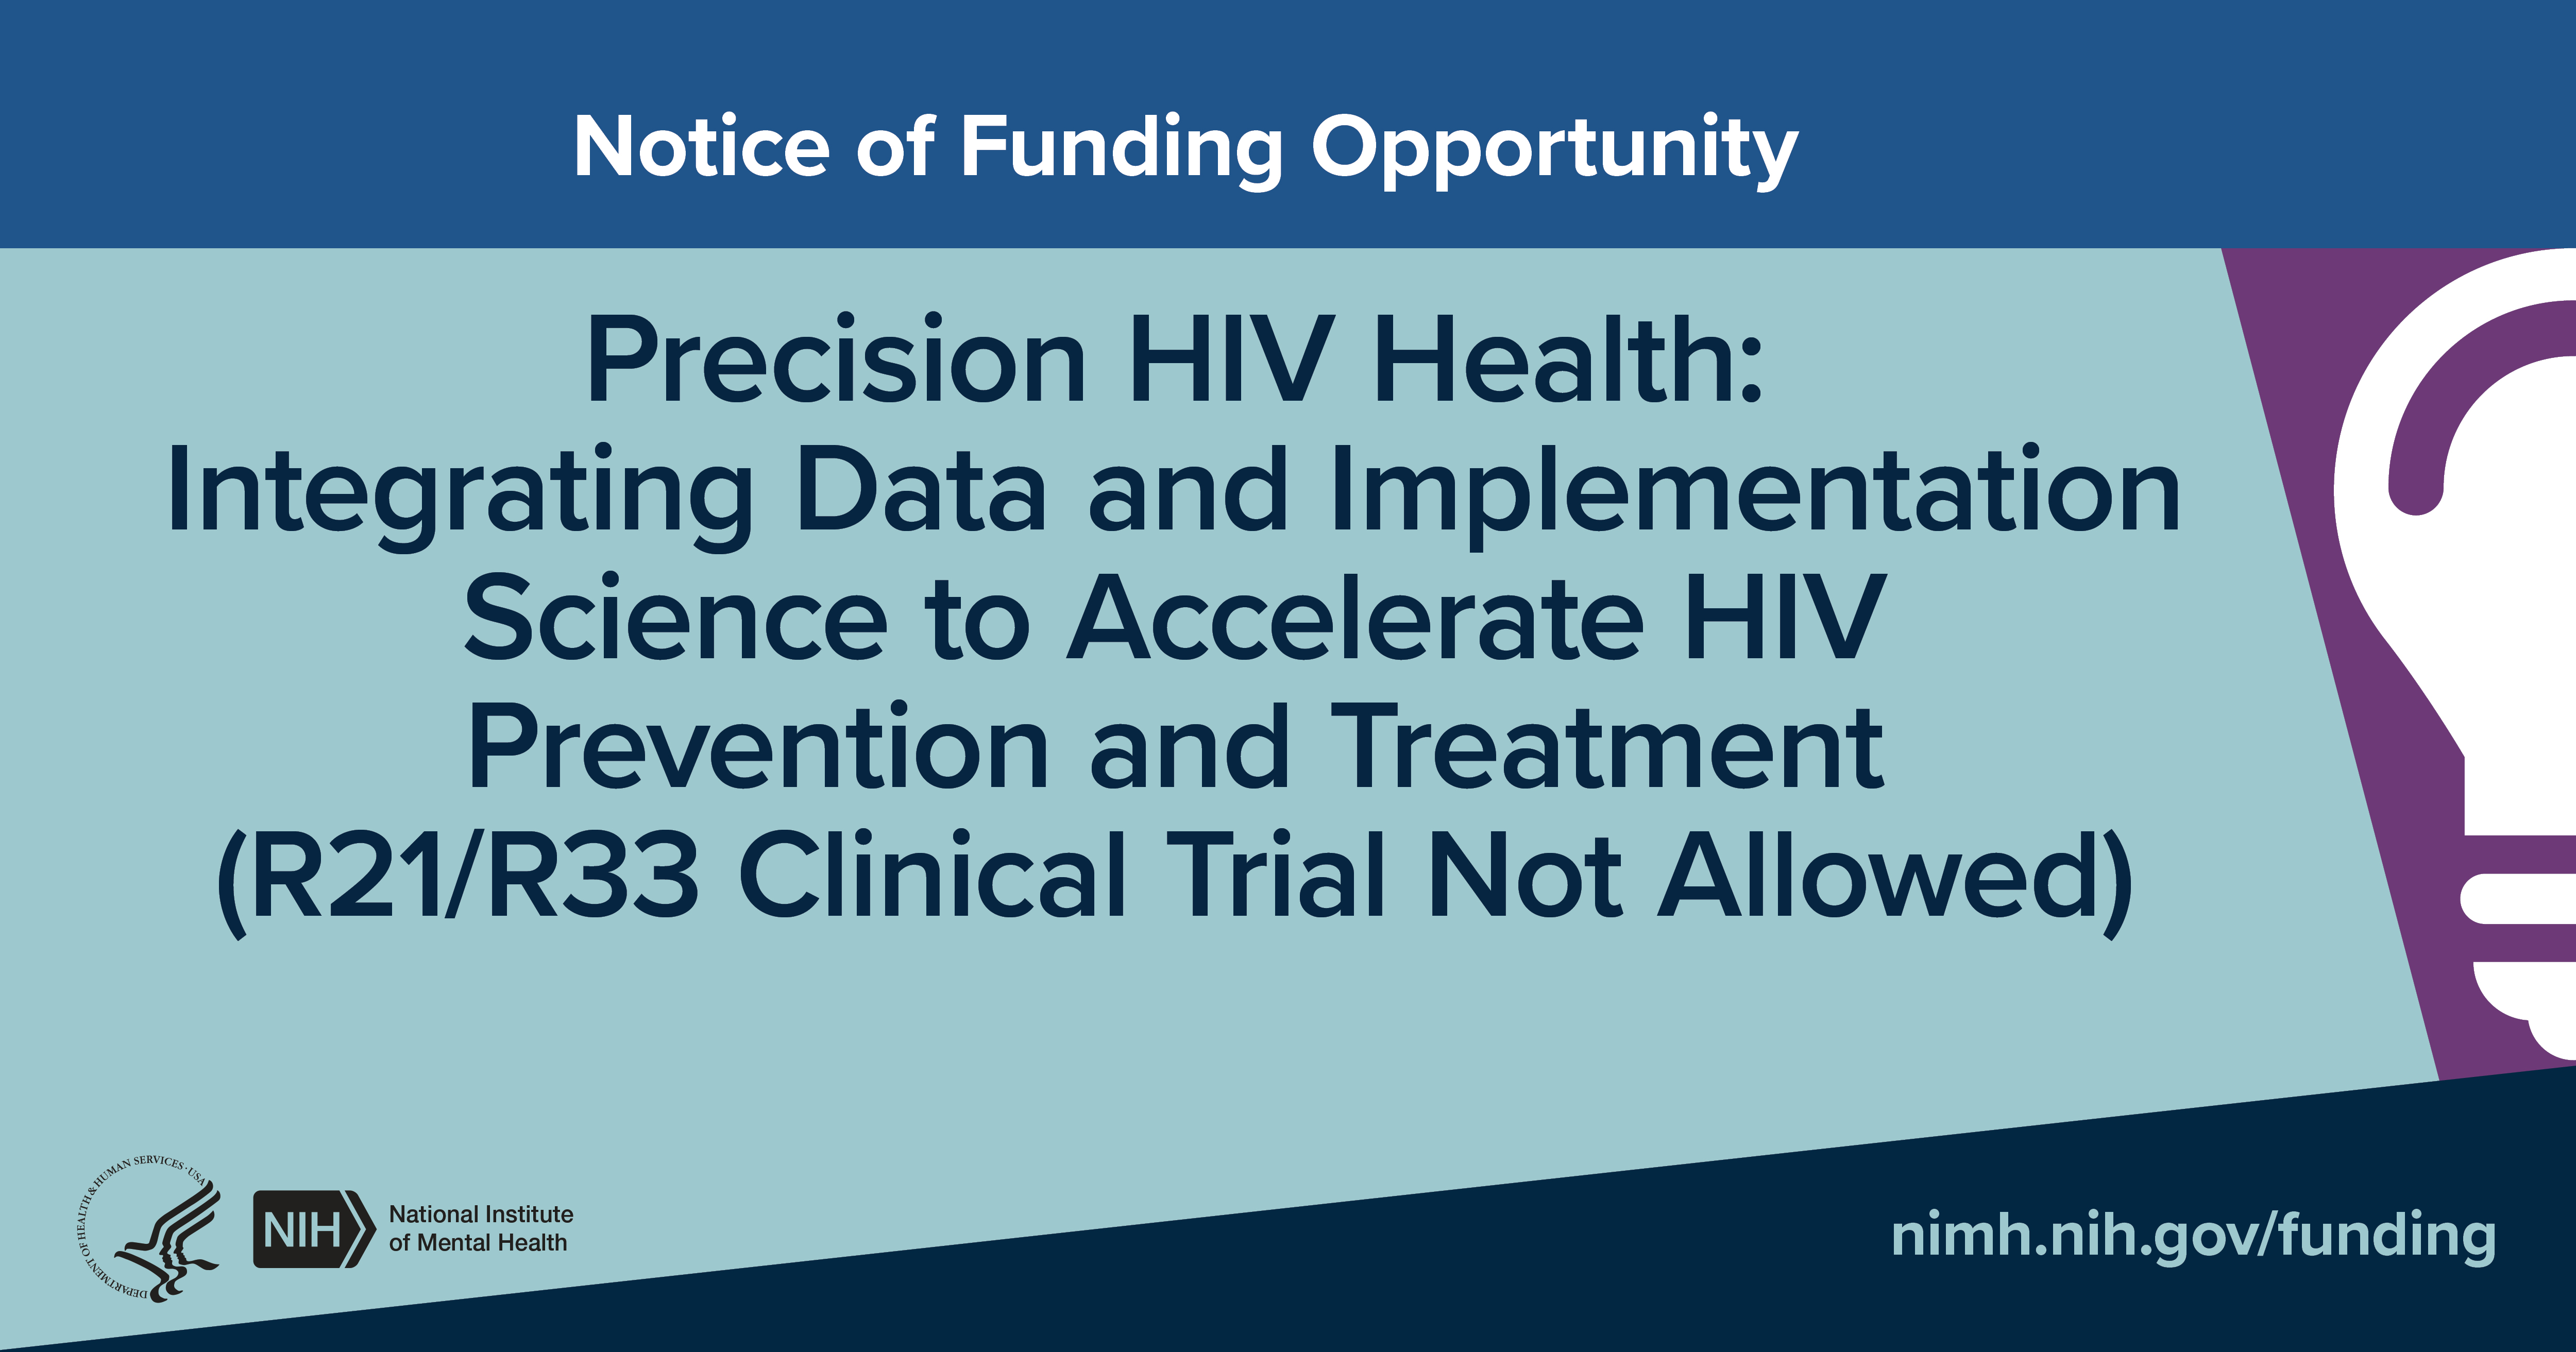 Integrating Information and Implementation Science to Speed up HIV Prevention and Remedy (R21/R33 Medical Trial Not Allowed)